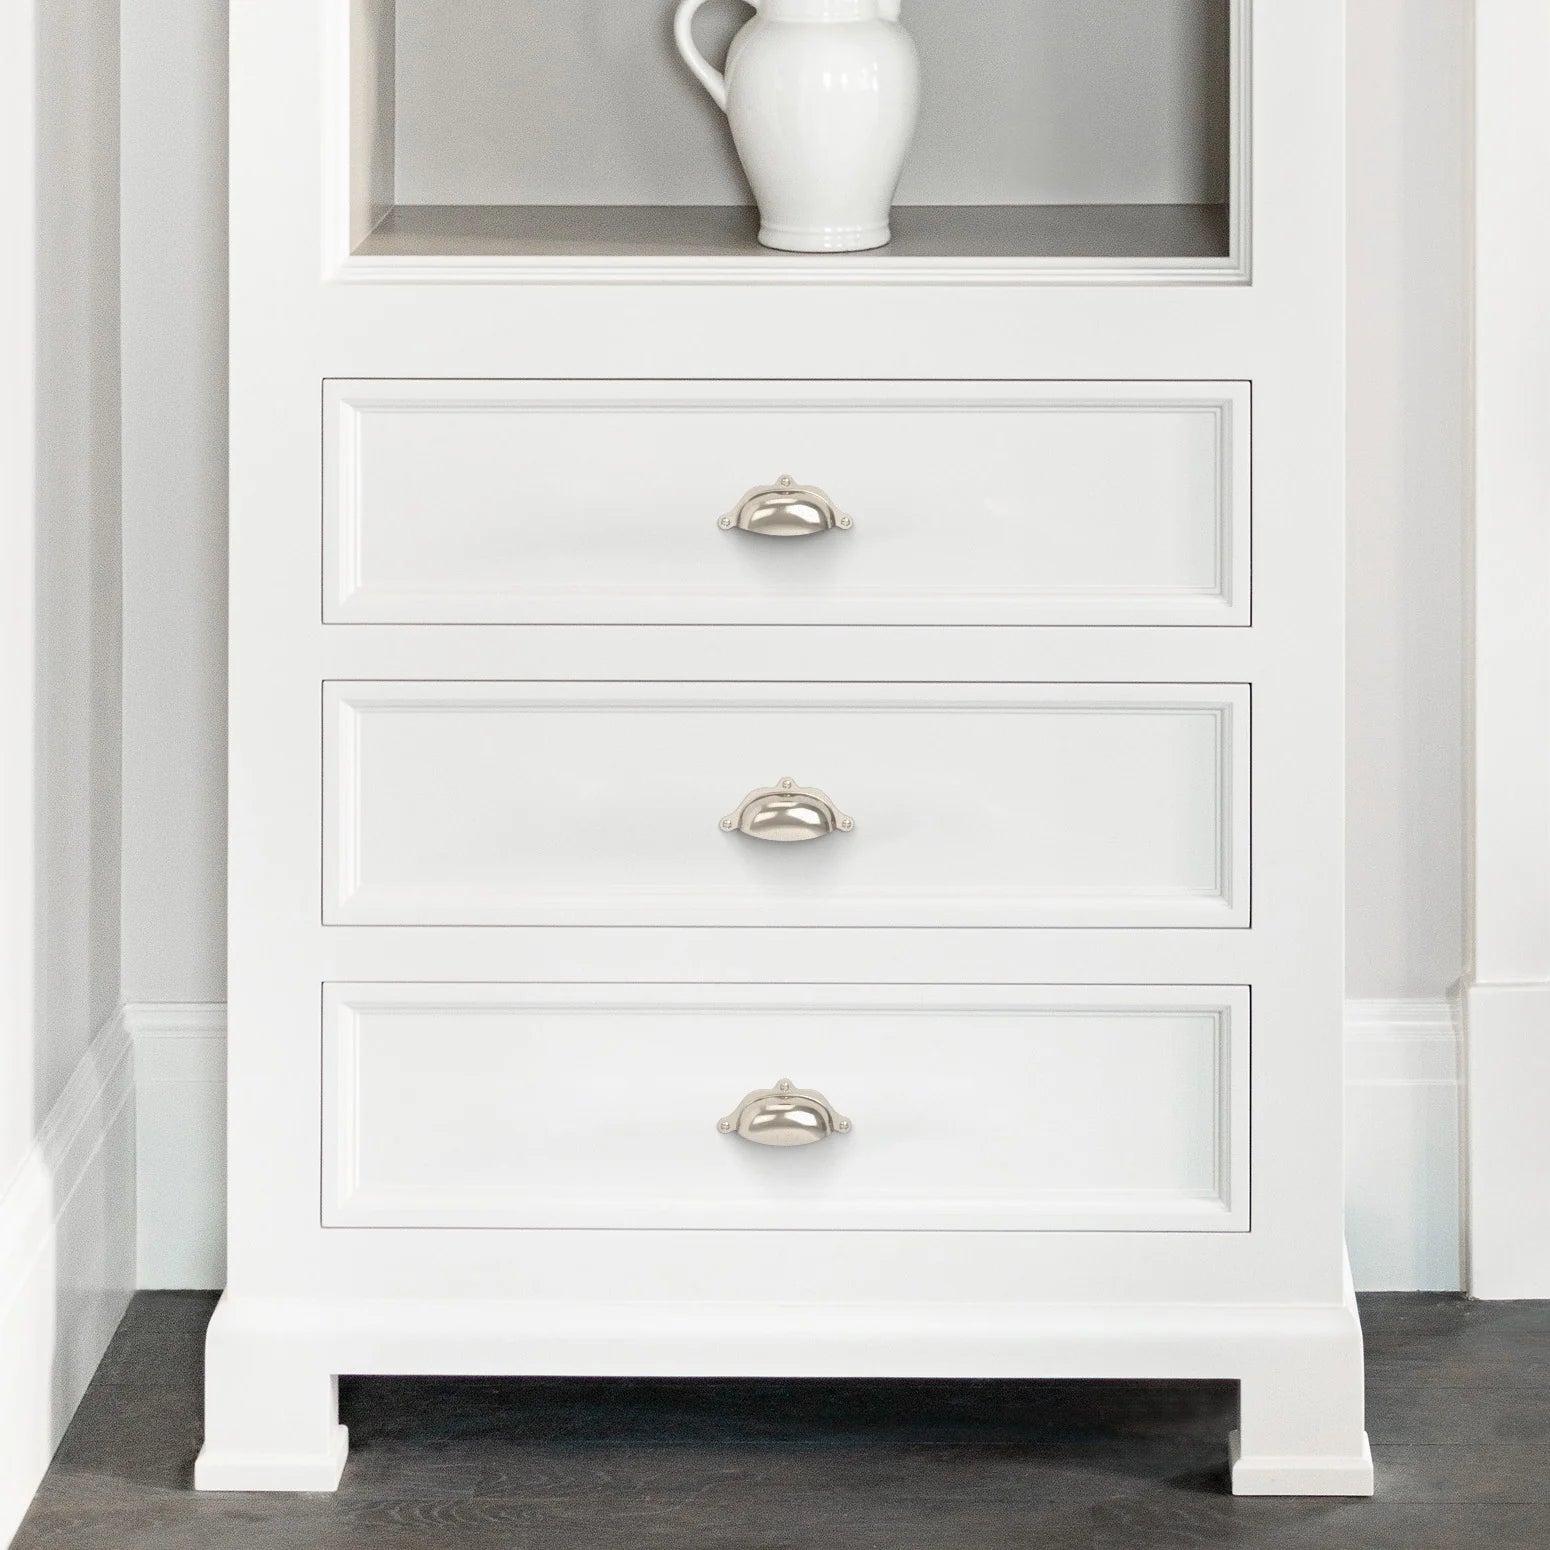 White wooden drawer cabinet with silver cup pull handles in a contemporary home setting